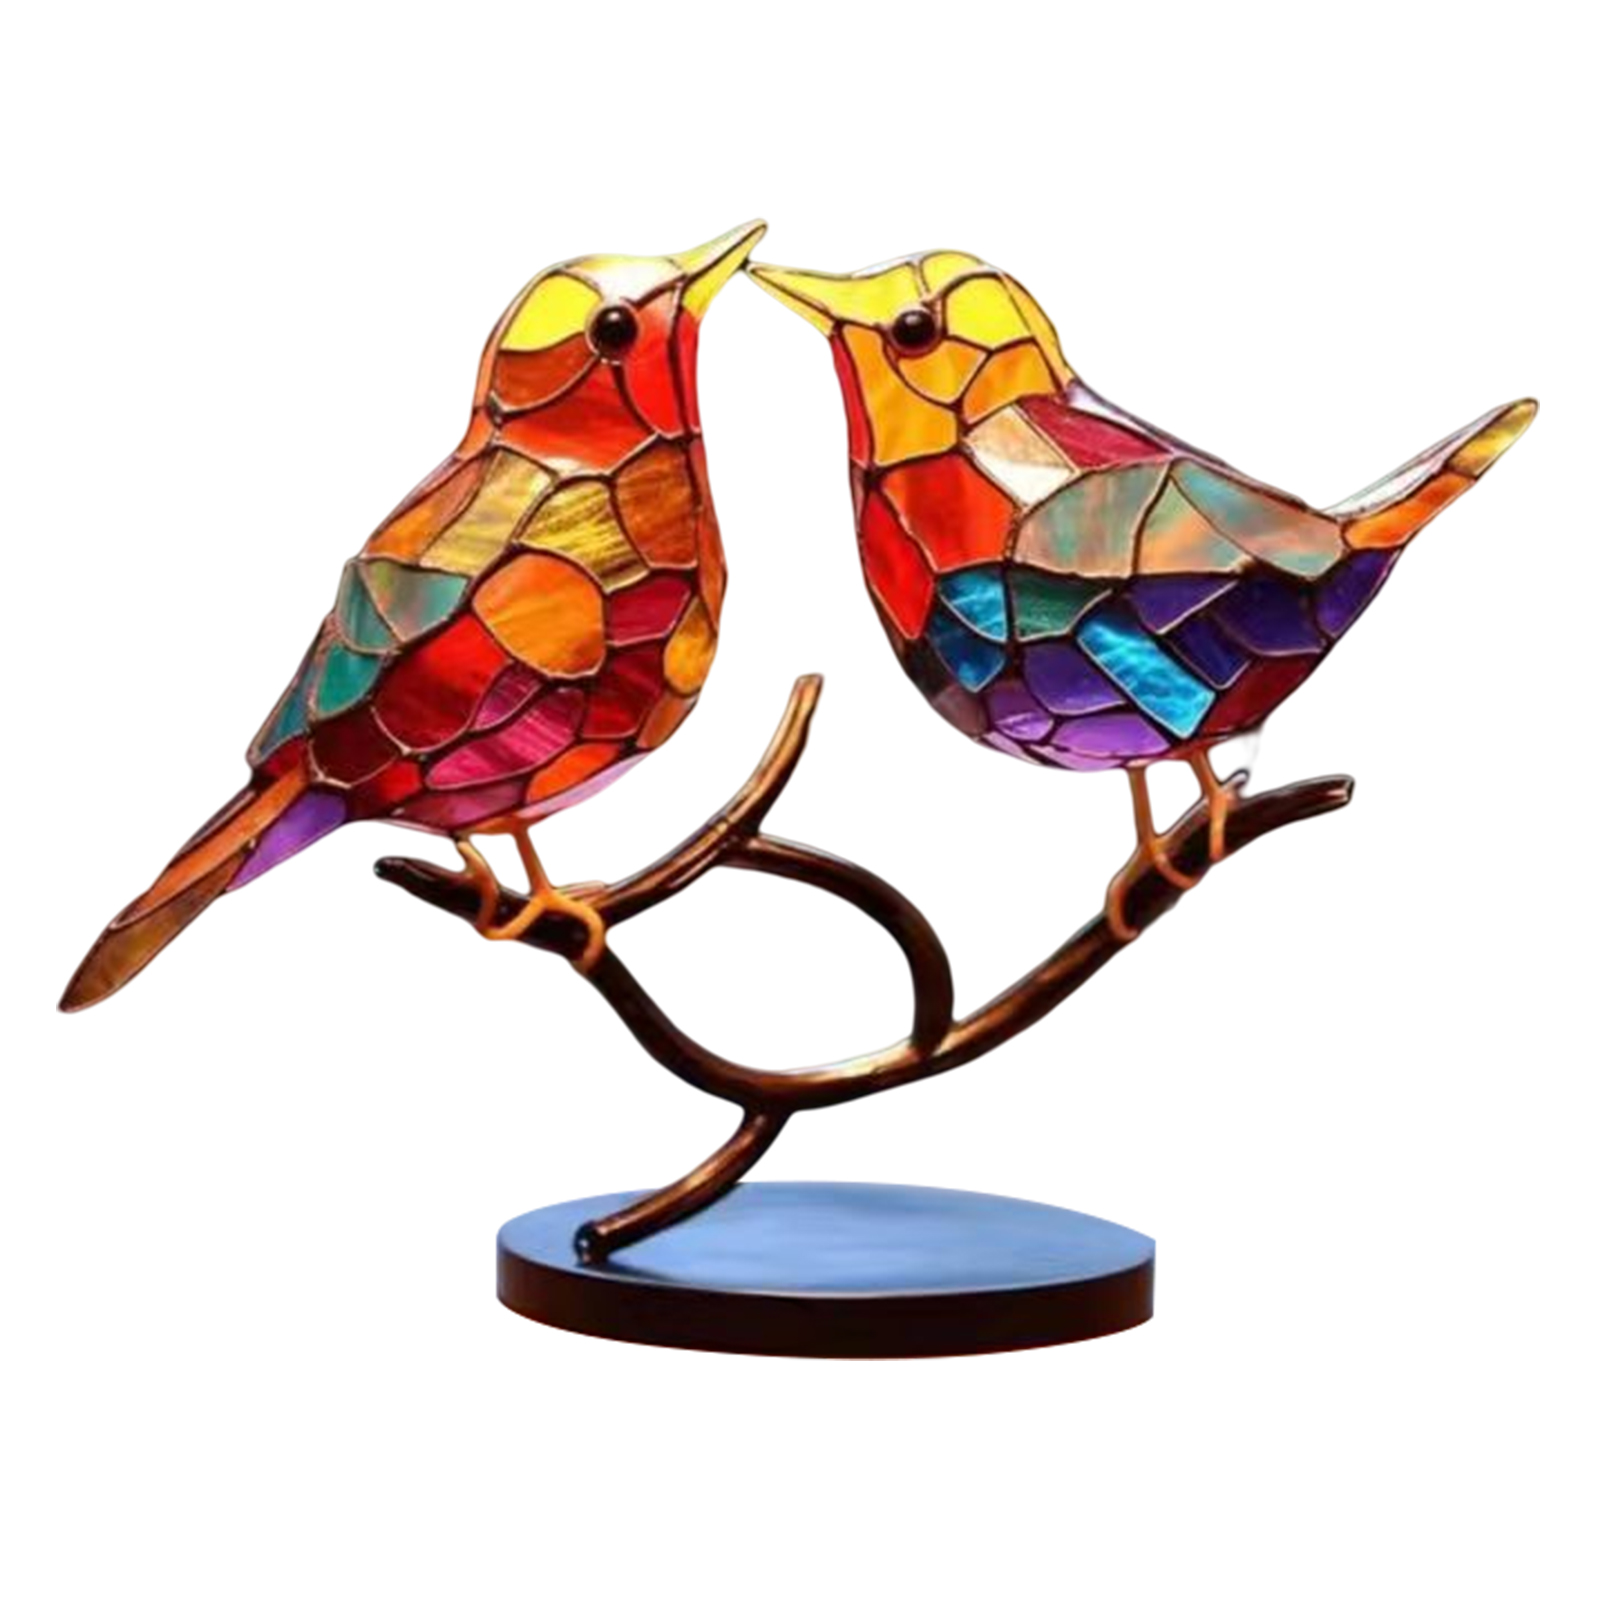 Acrylic Birds on Branch Statue Art Craft Stained Birds Ornament Home Decor (B)